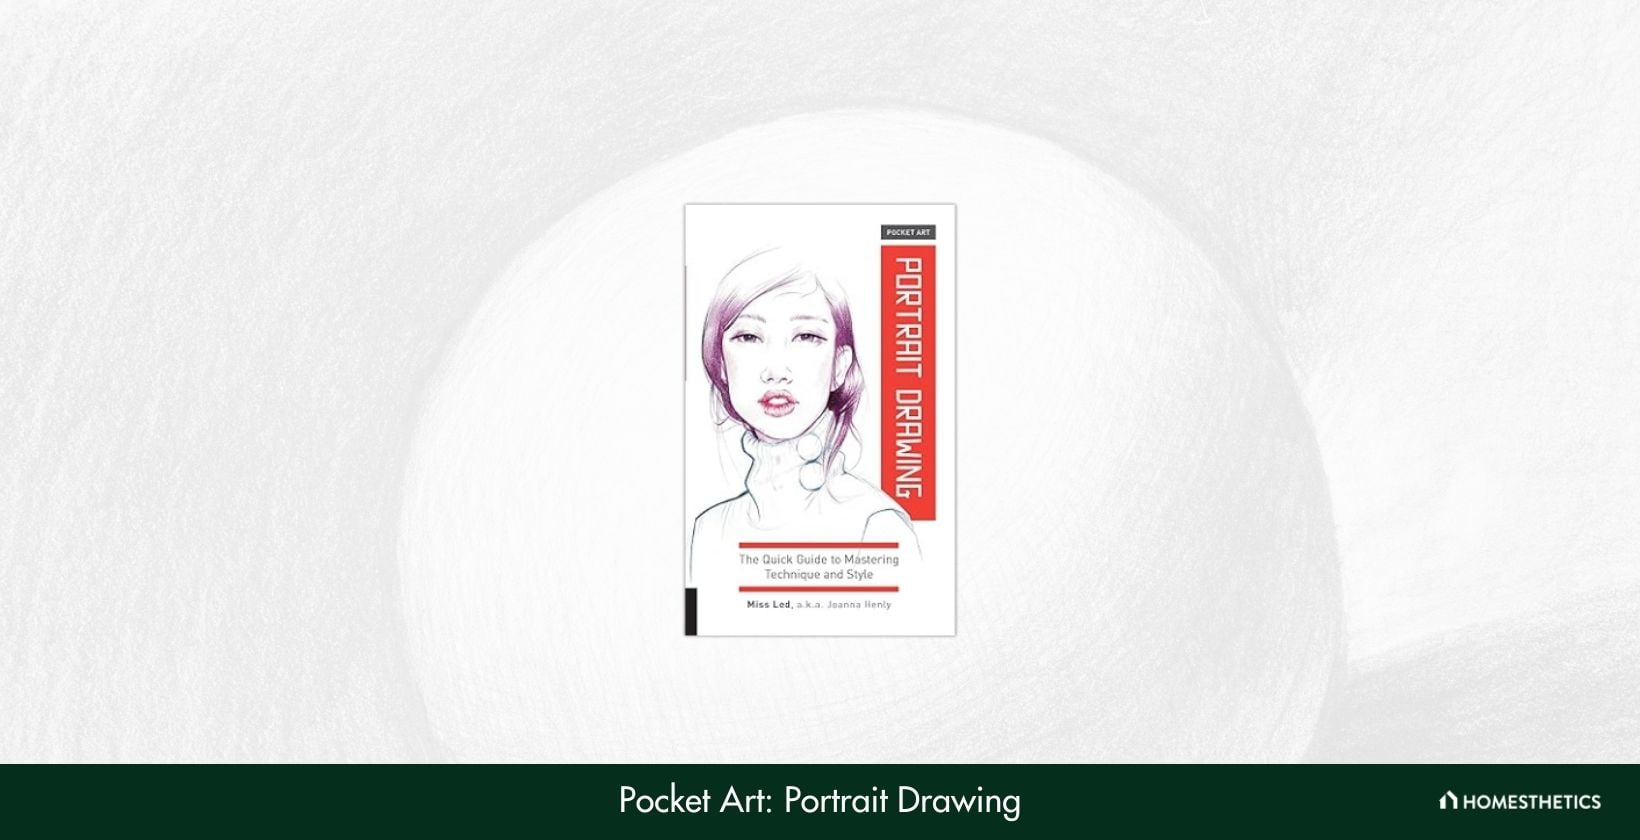 Pocket Art Portrait Drawing The Quick Guide to Mastering Technique and Style by Joanna Henly